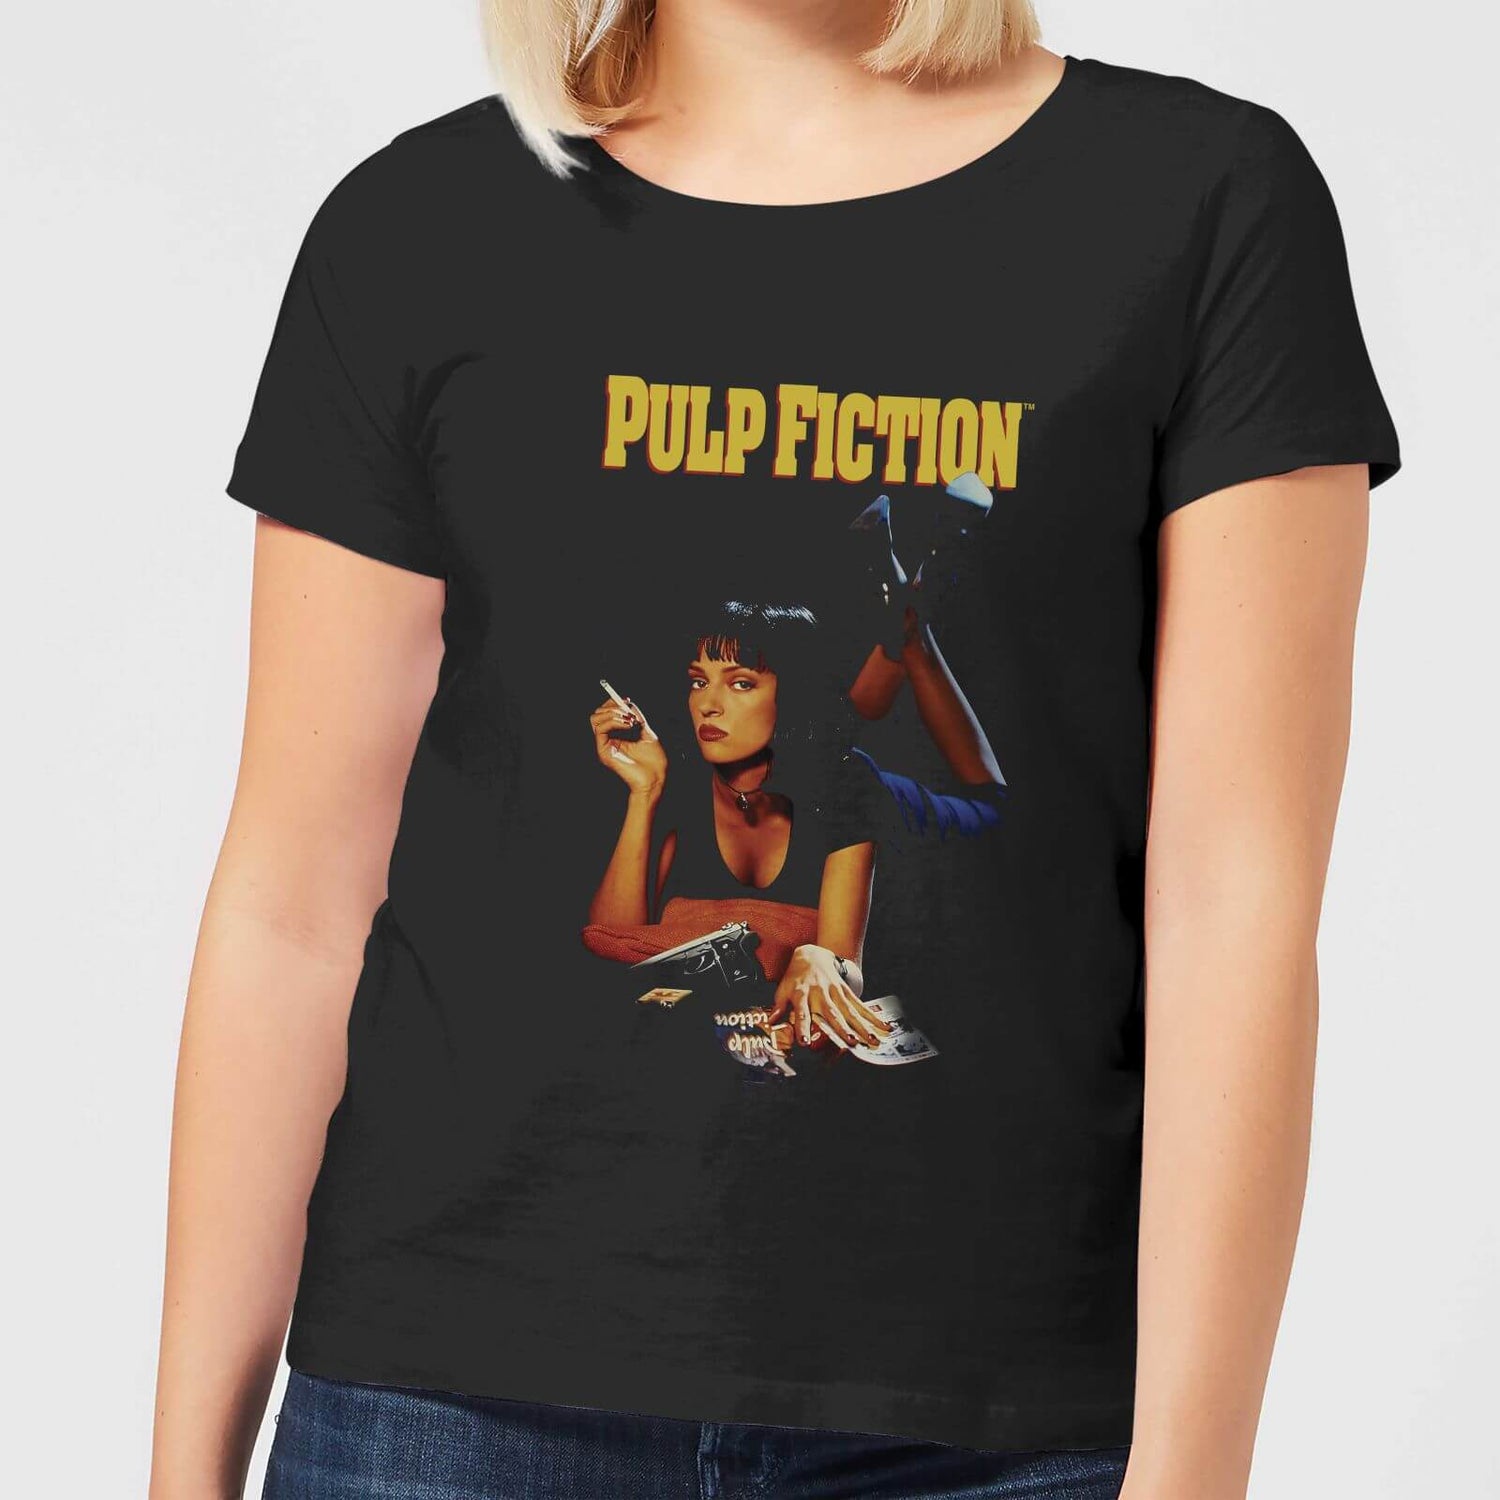 Pulp Fiction Walking Dead Classic Movie Film Inspired Fitted T-Shirt Tee Women